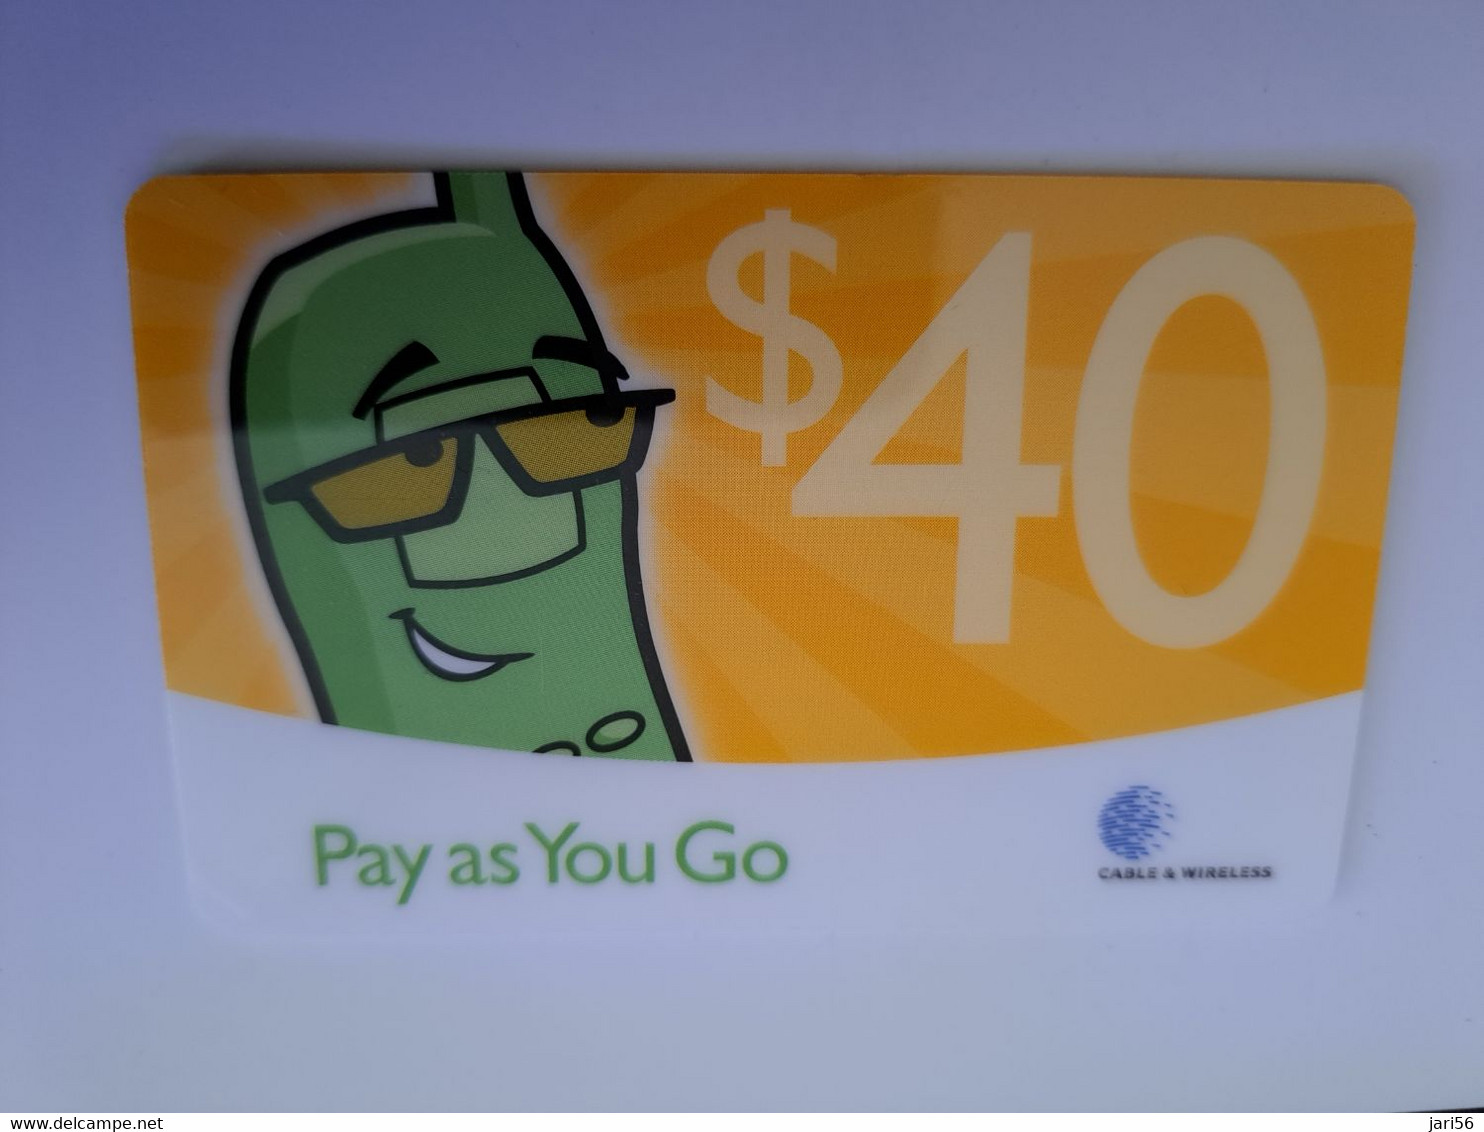 ST VINCENT & GRENADINES   $40,-  PAY AS YOU GO   Prepaid  THICK CARD    Fine Used Card  ** 11358** - St. Vincent & The Grenadines